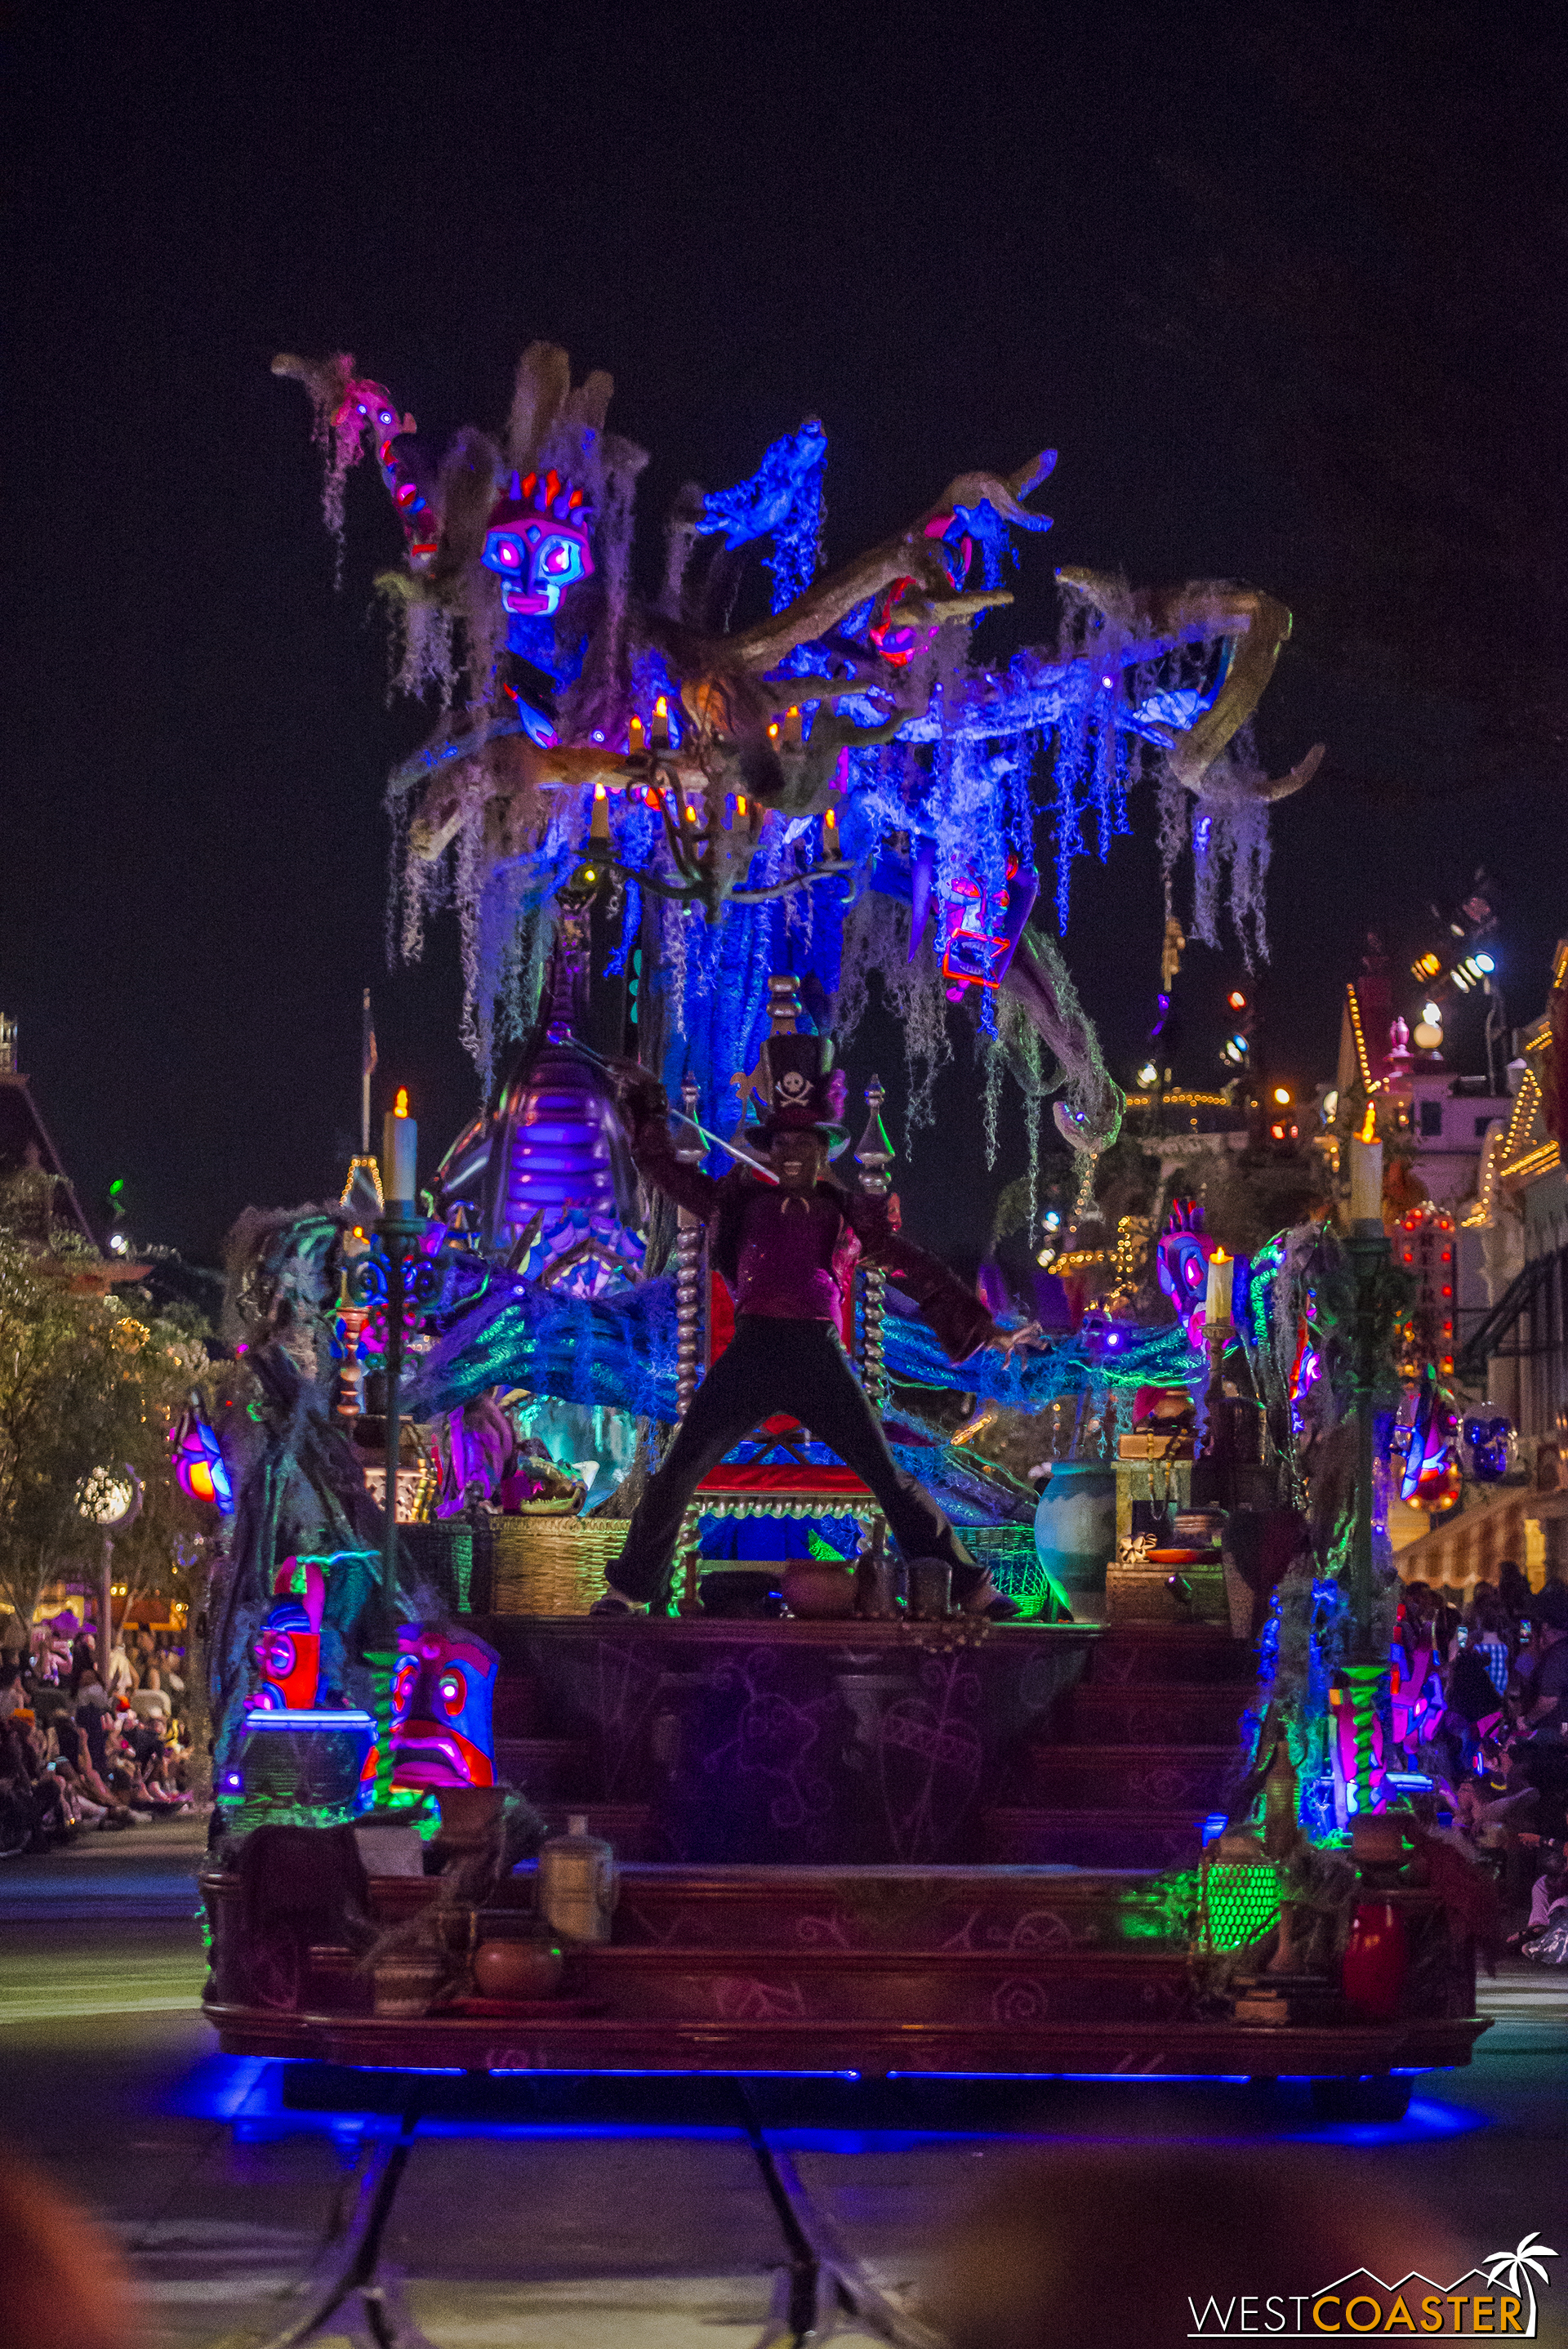  His  Princess and the Frog  float is a haunting spectacle. 